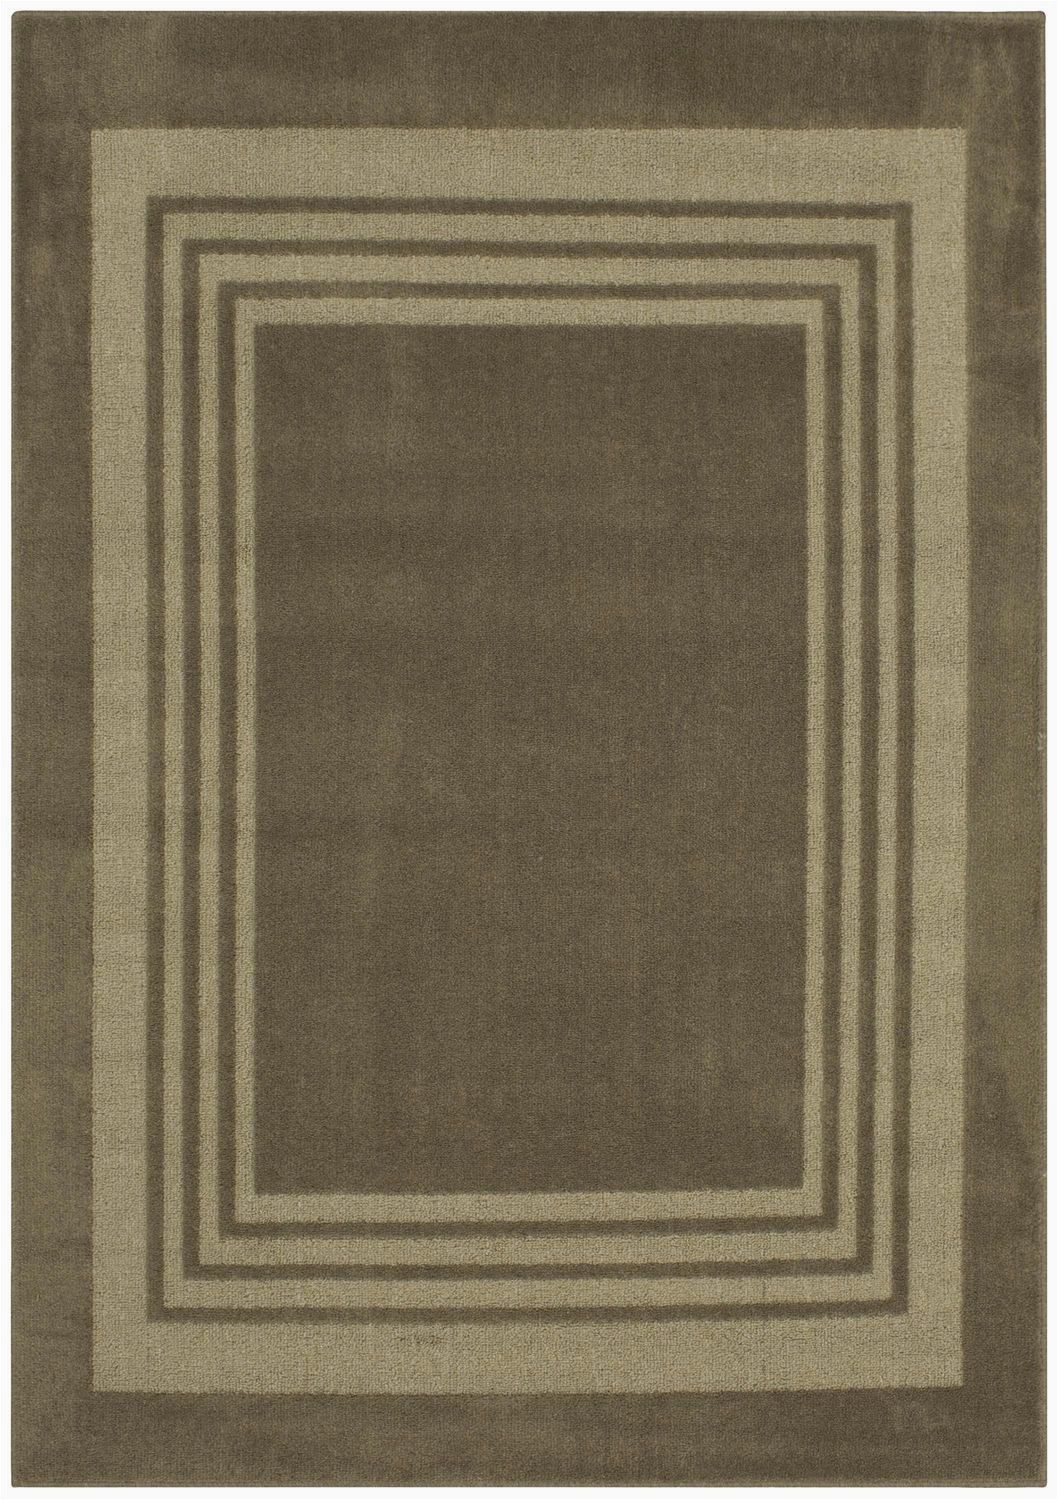 Mohawk area Rug 60 X 84 Hometrends Taupe Jackie area Rug 5 X 7